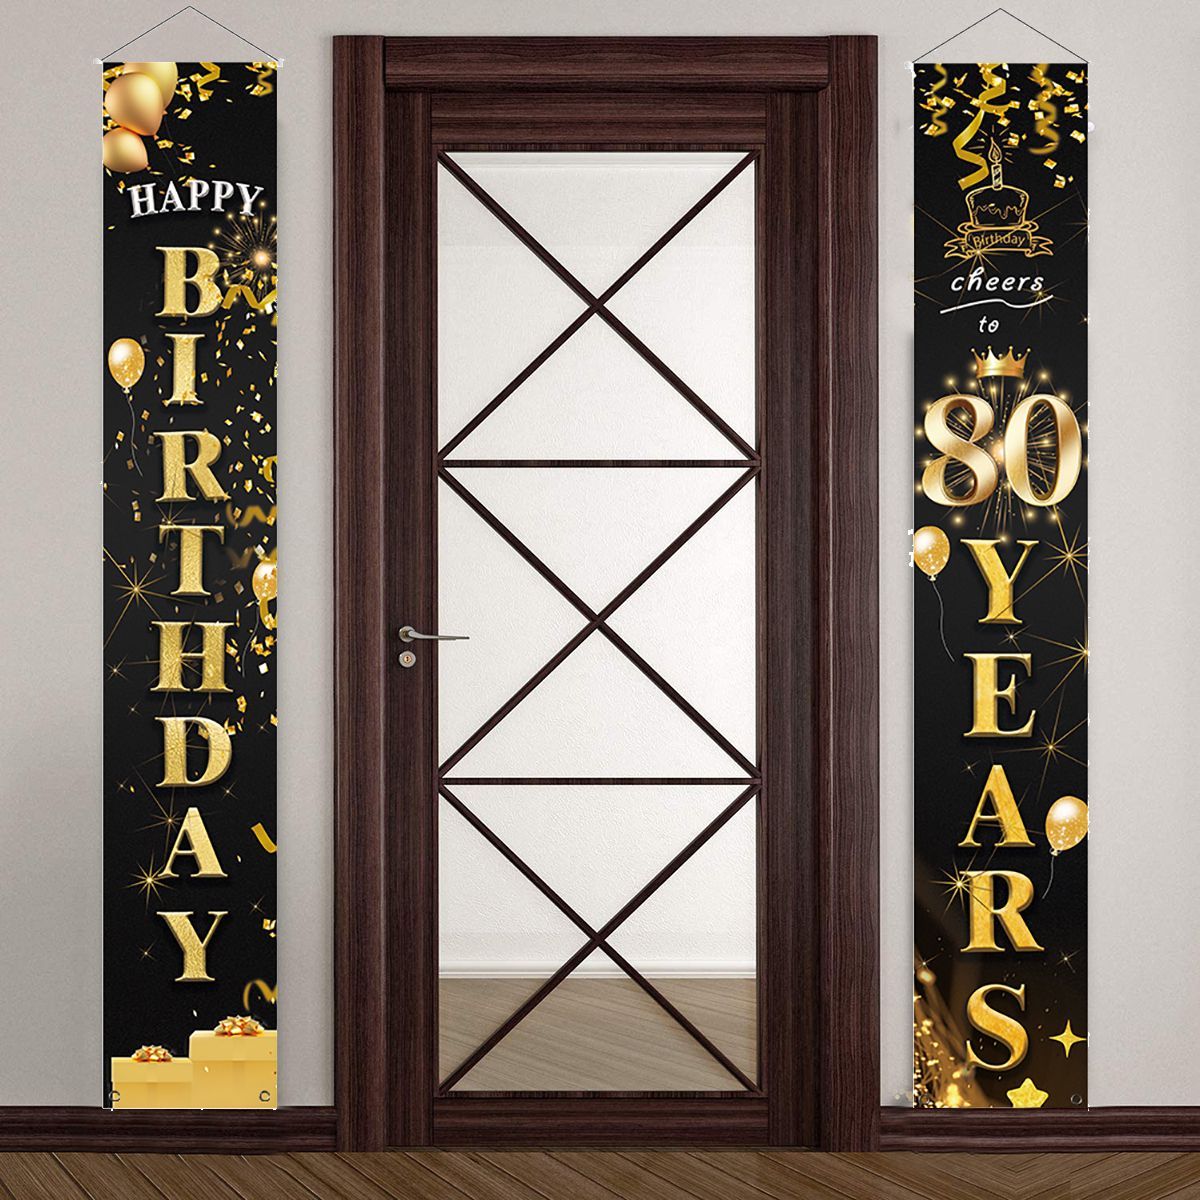 Happy-Birthday-Bunting-Banner-Door-Wall-Hanging-Decor-Couple-Party-Holidays-1830509